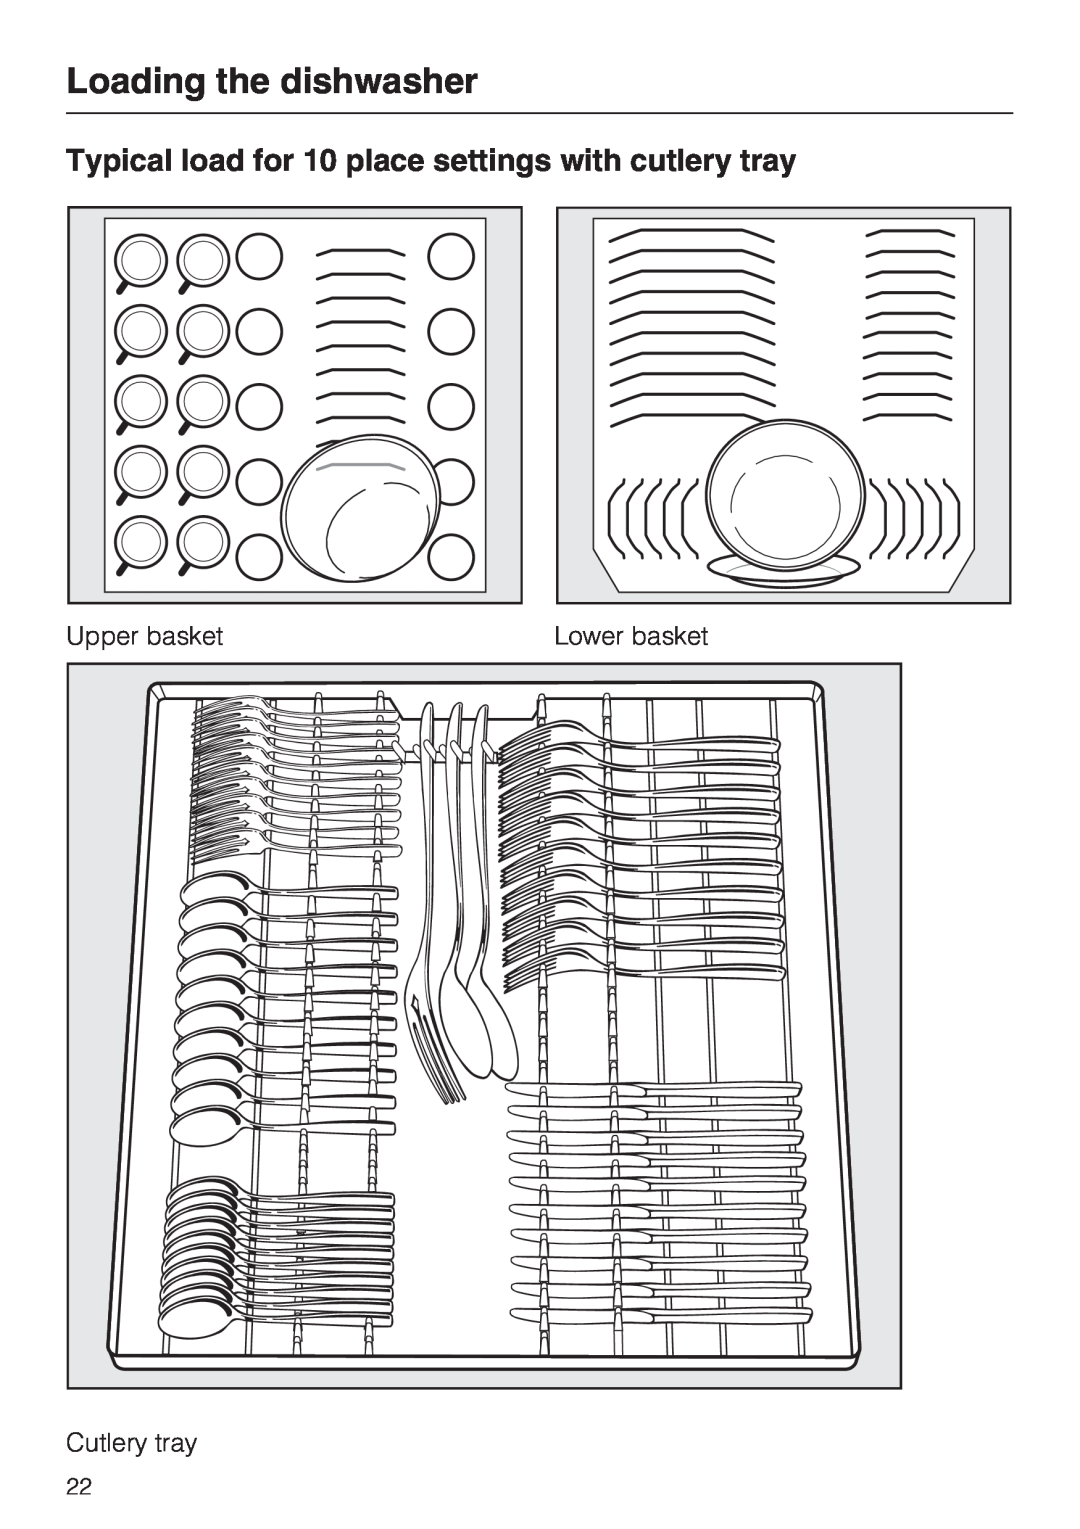 Miele G 5225, G 5220 operating instructions Loading the dishwasher, Upper basket, Lower basket, Cutlery tray 